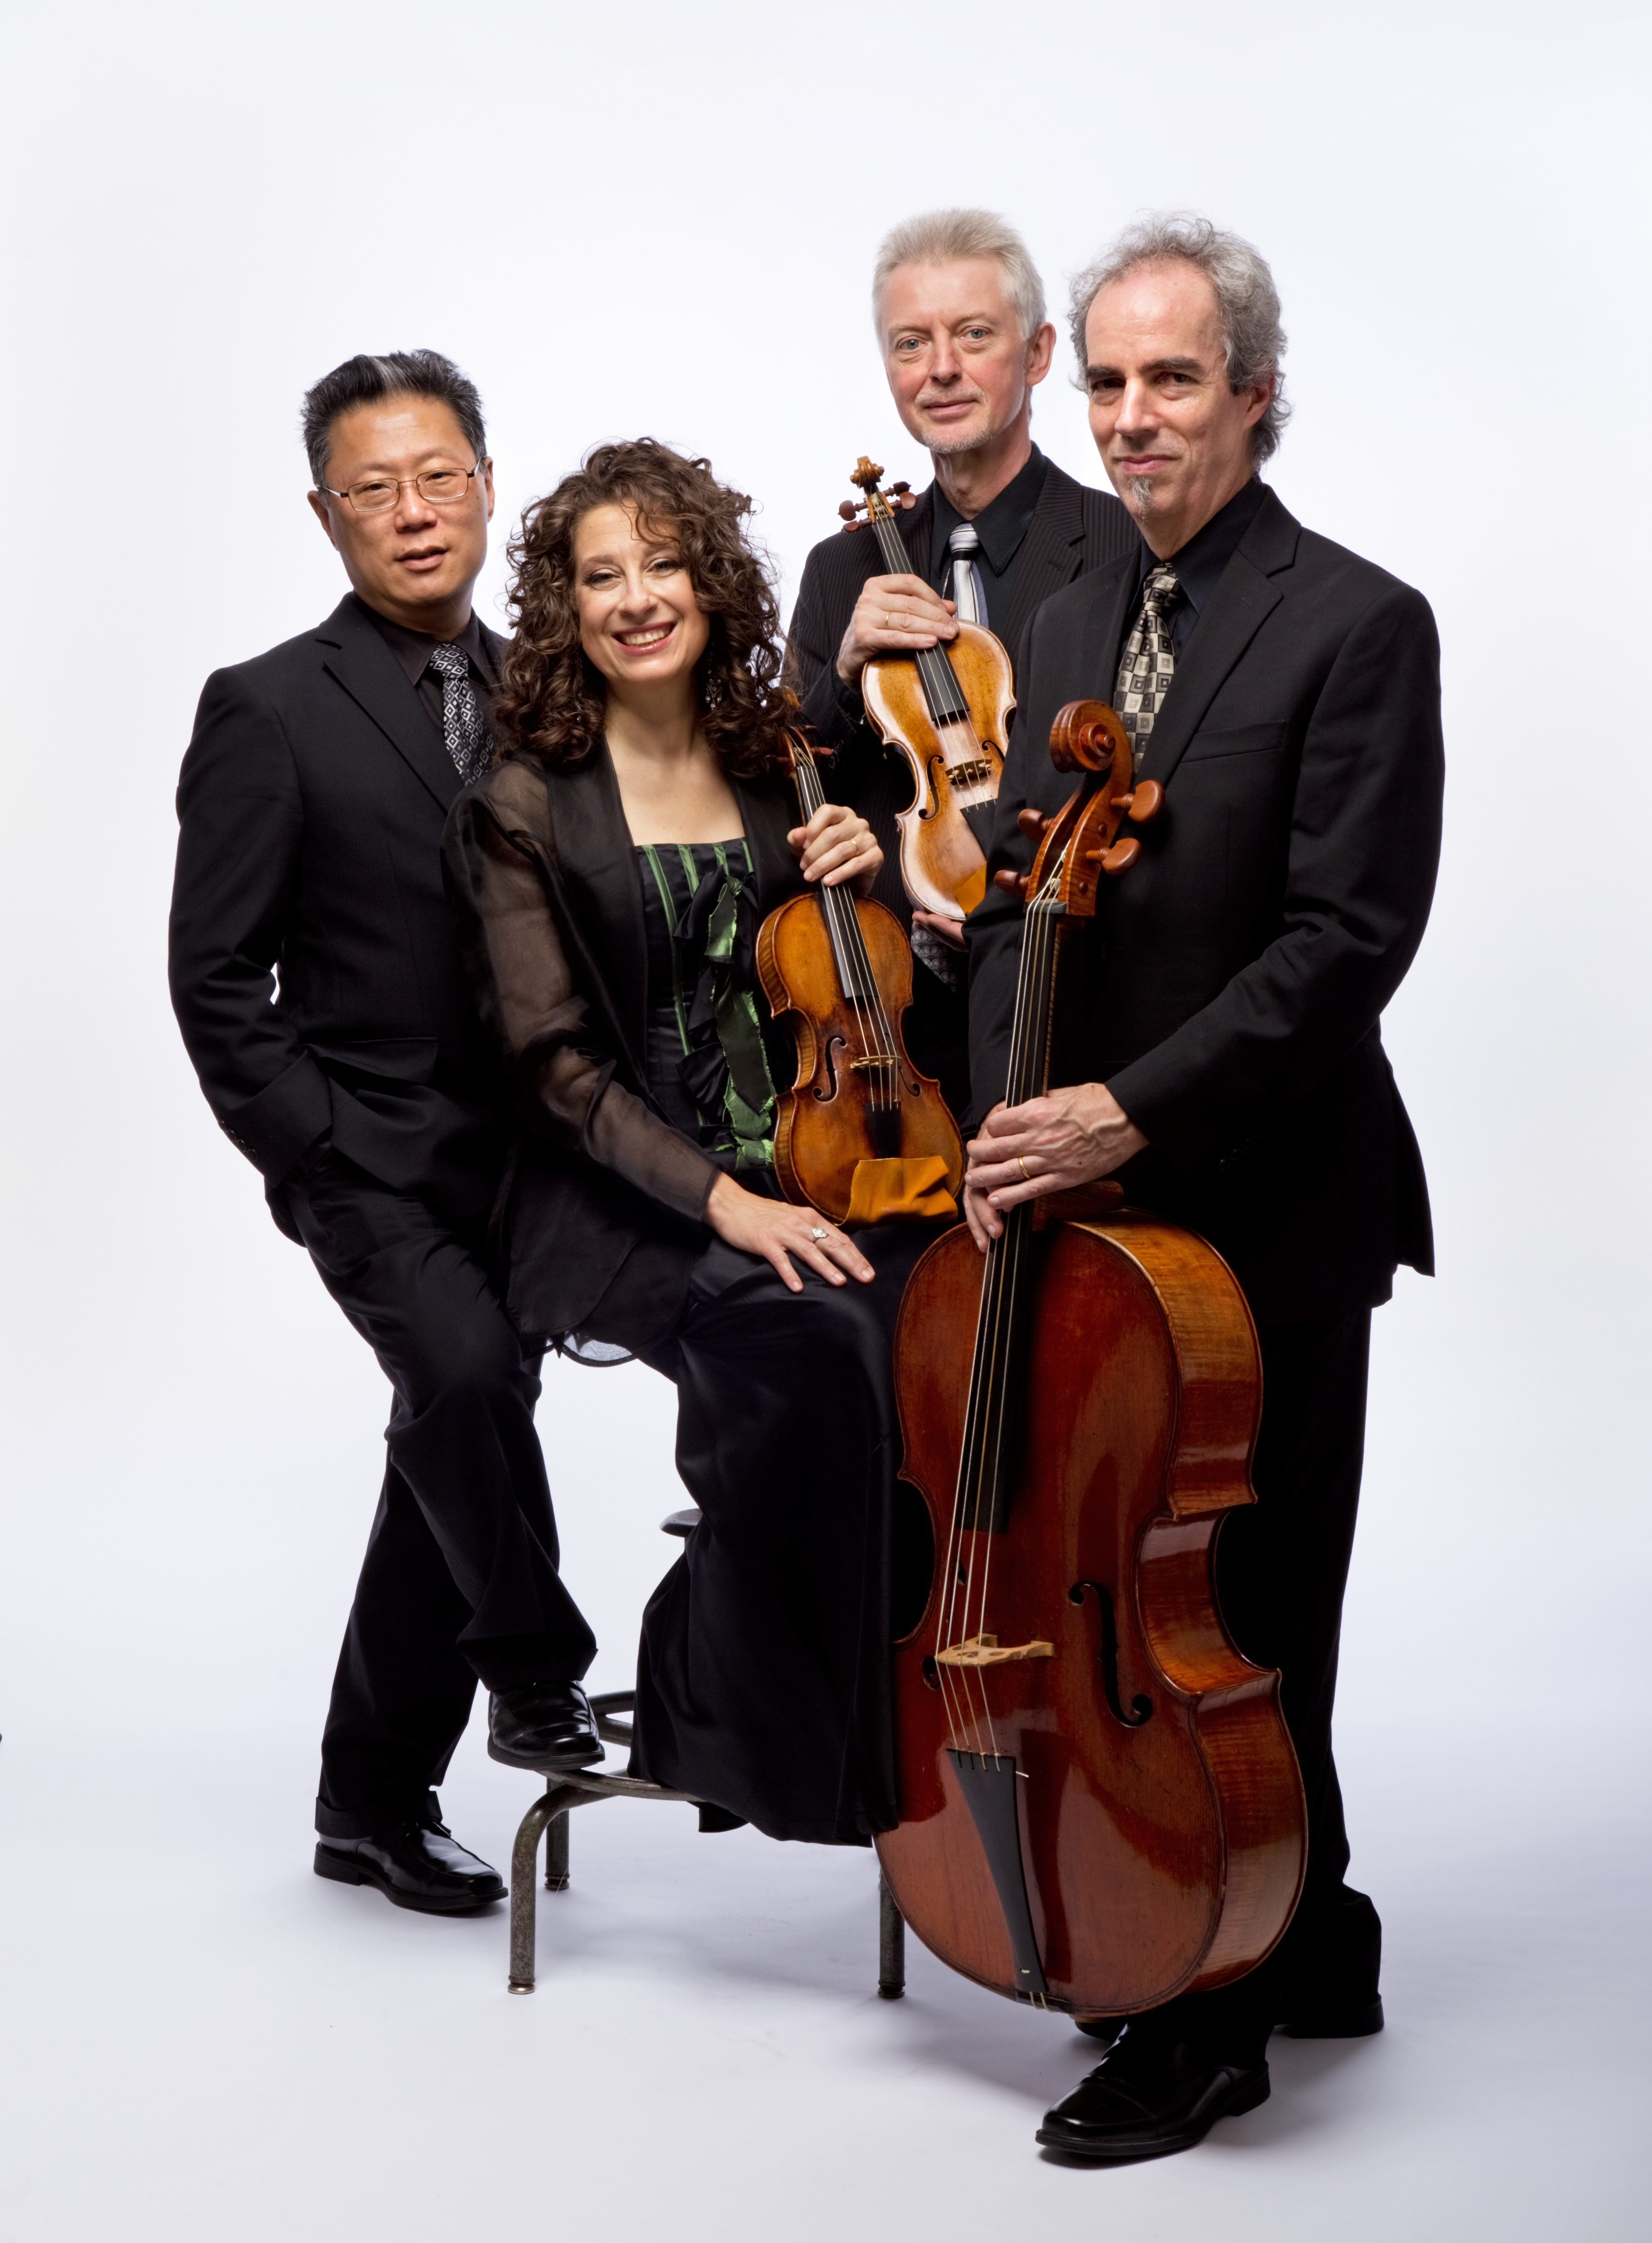 REBEL Presents: “A Rococco Extravaganza" - Concert of Baroque & Classical Chamber Music